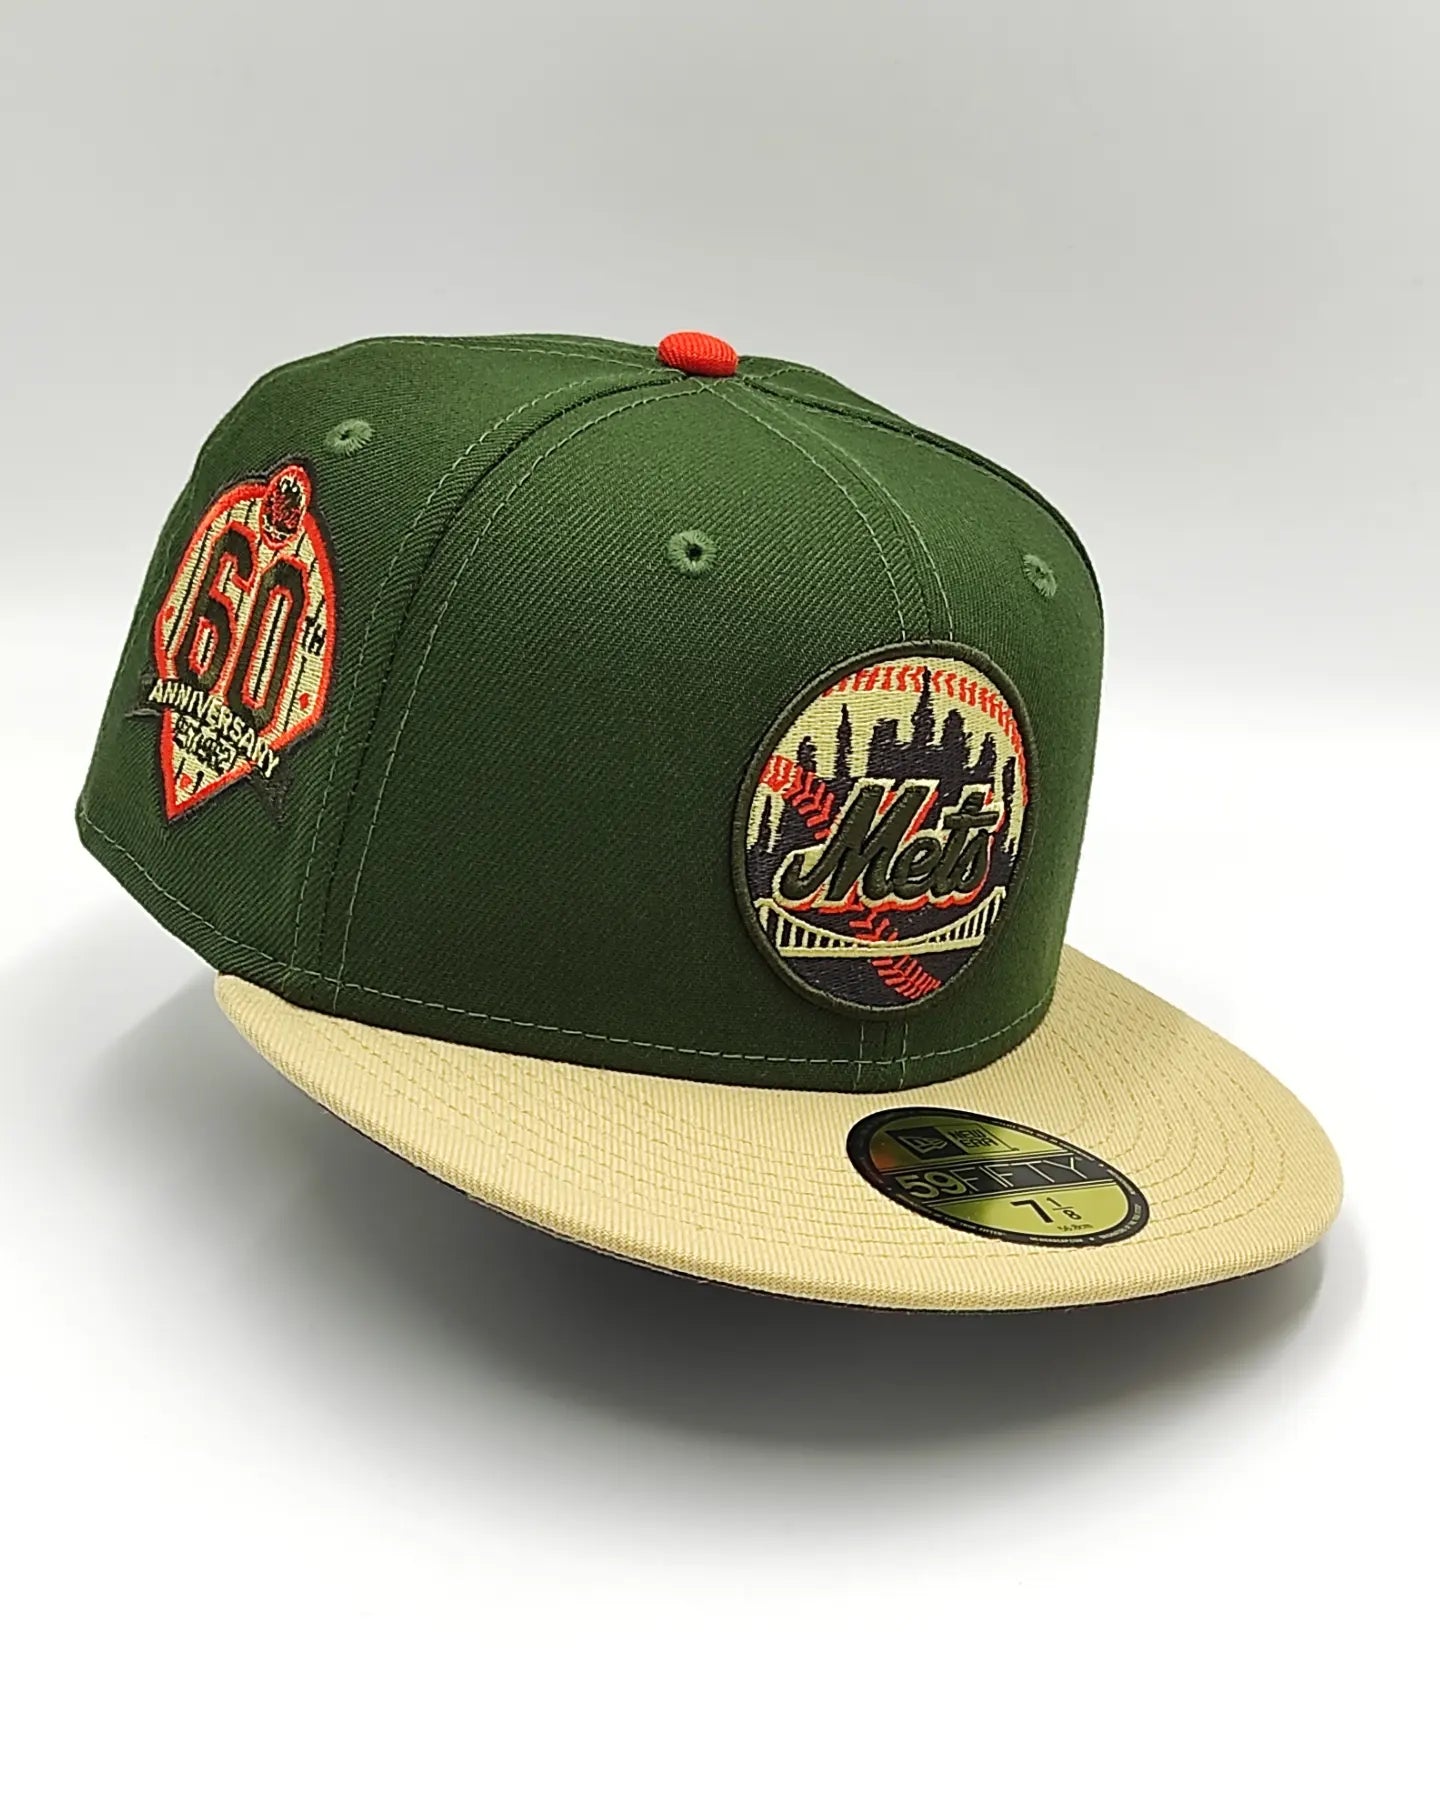 New Era New York Mets 60th anniversary camo two tone edition 59fifty fitted hat